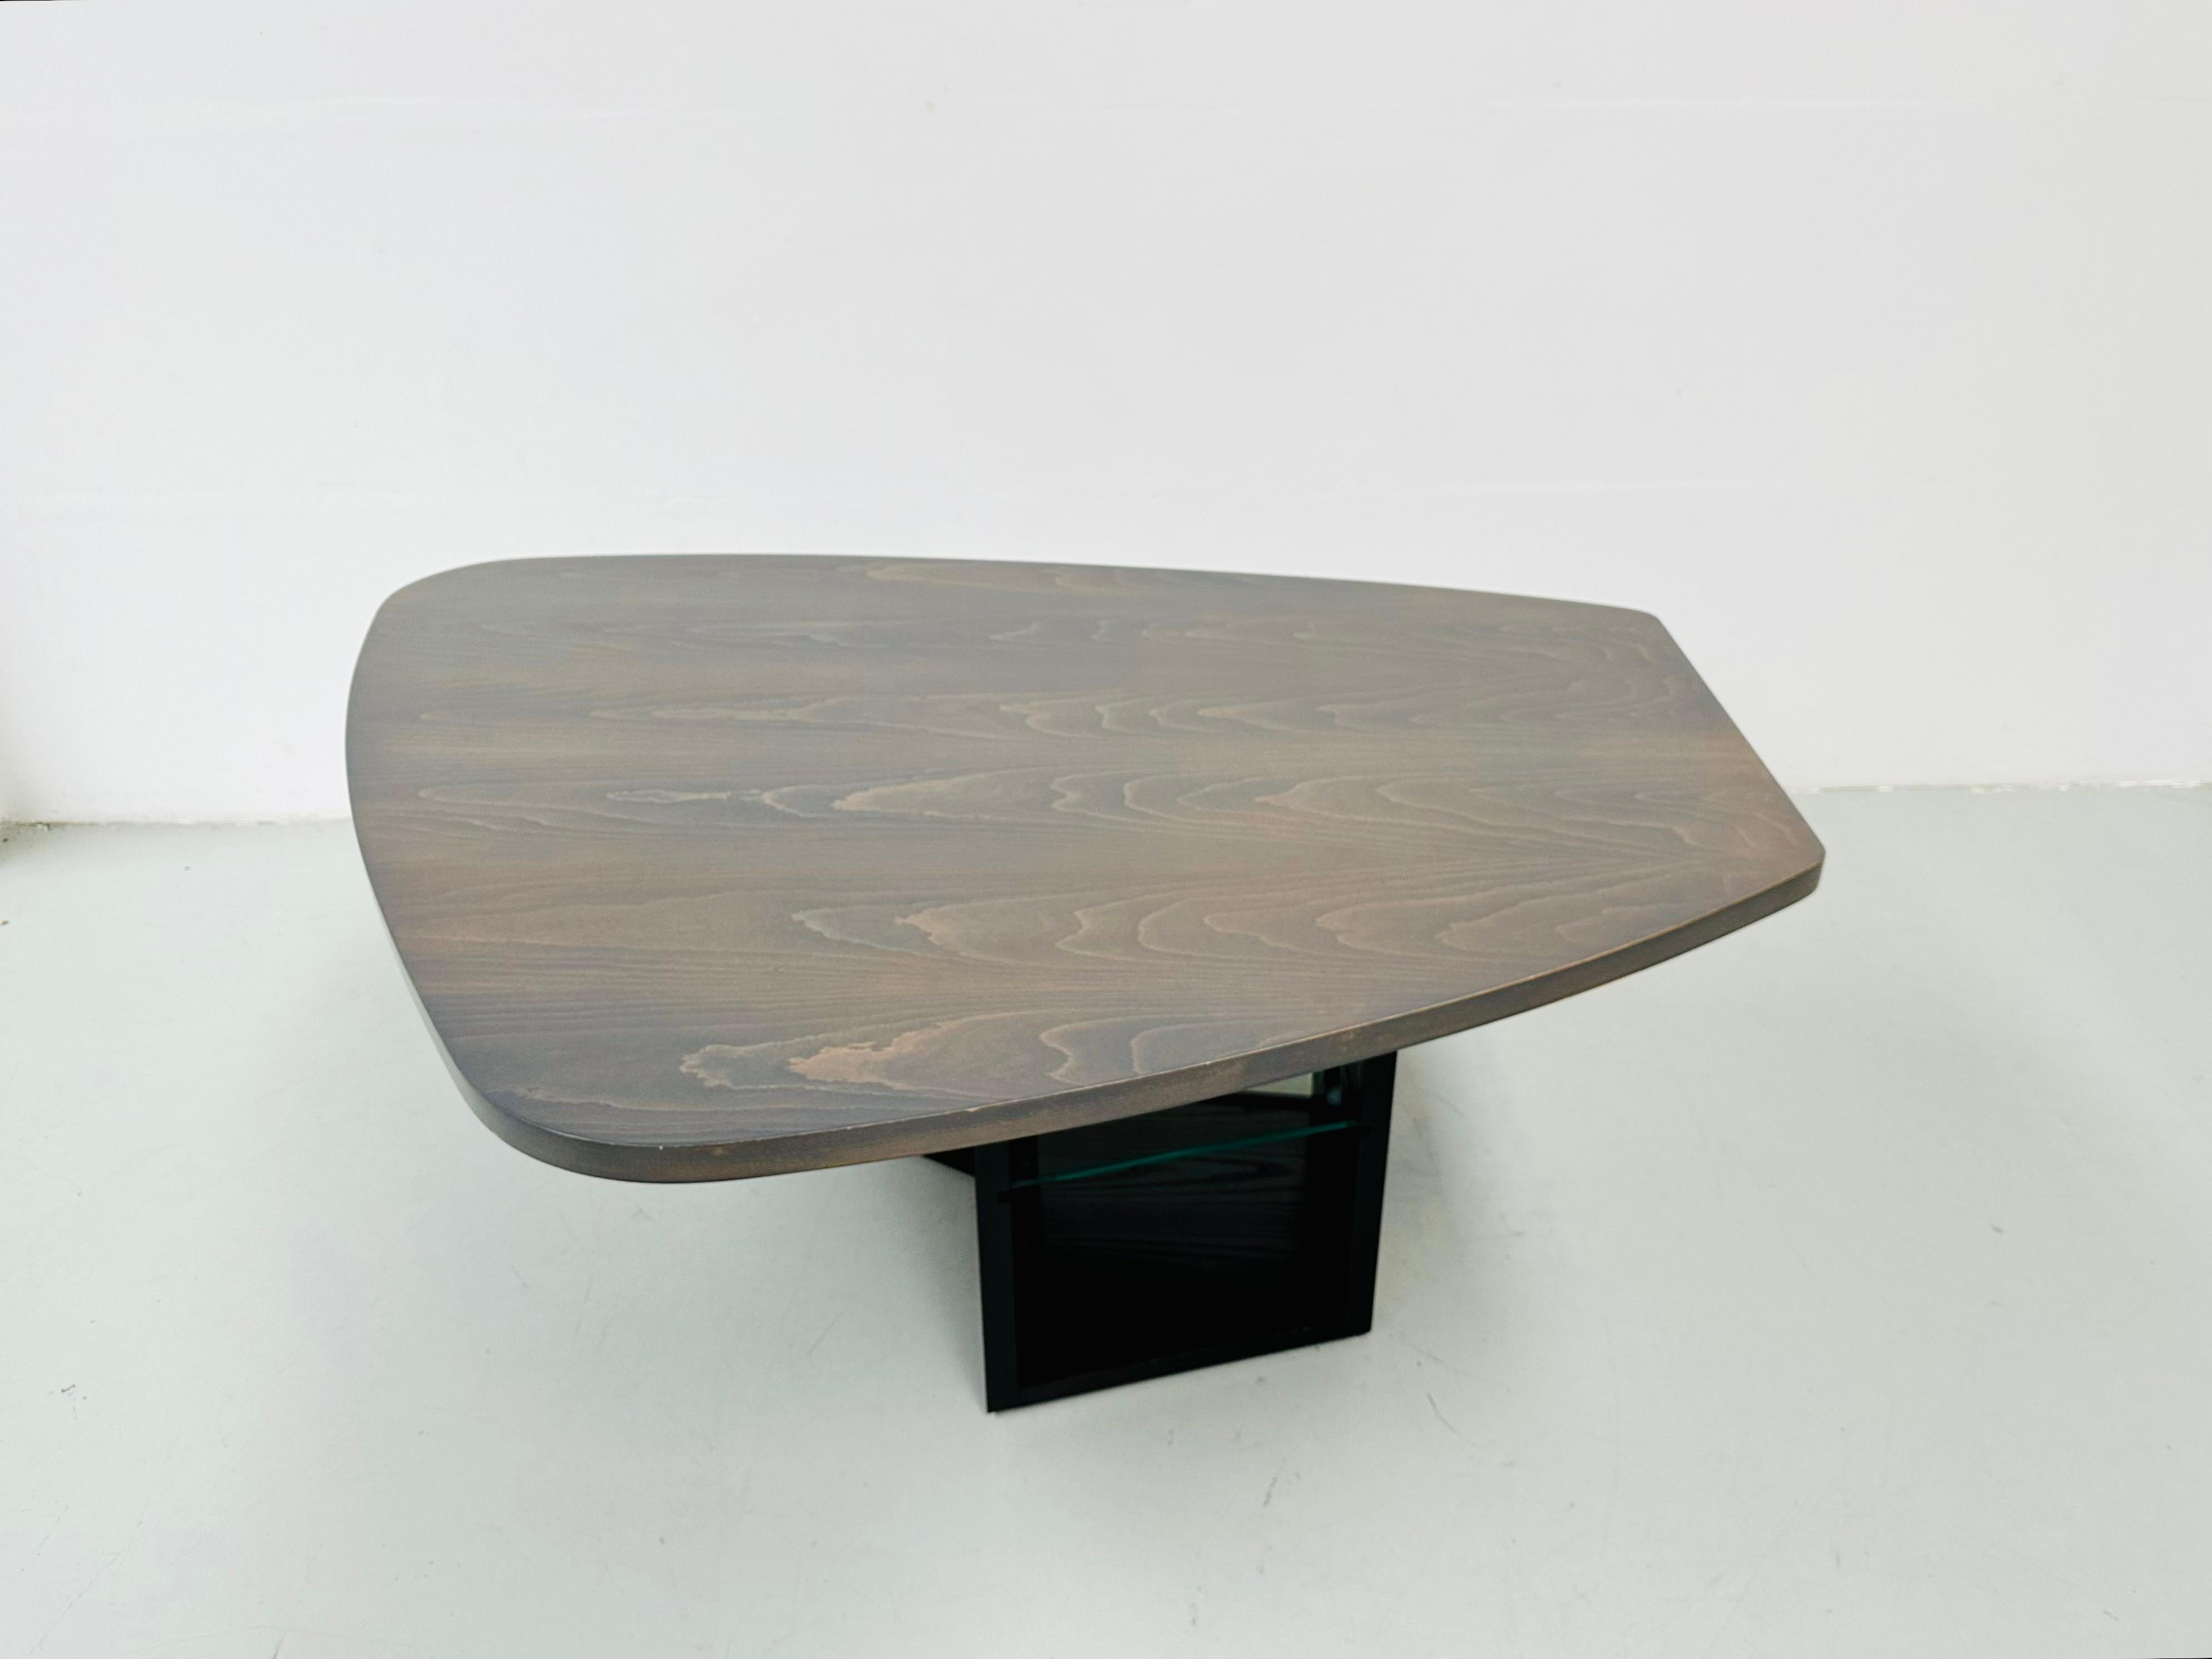 Bauhaus Vintage French Tecta M21 Desk / Table in Black and Silver By Jean Prouvé, 1980s. For Sale